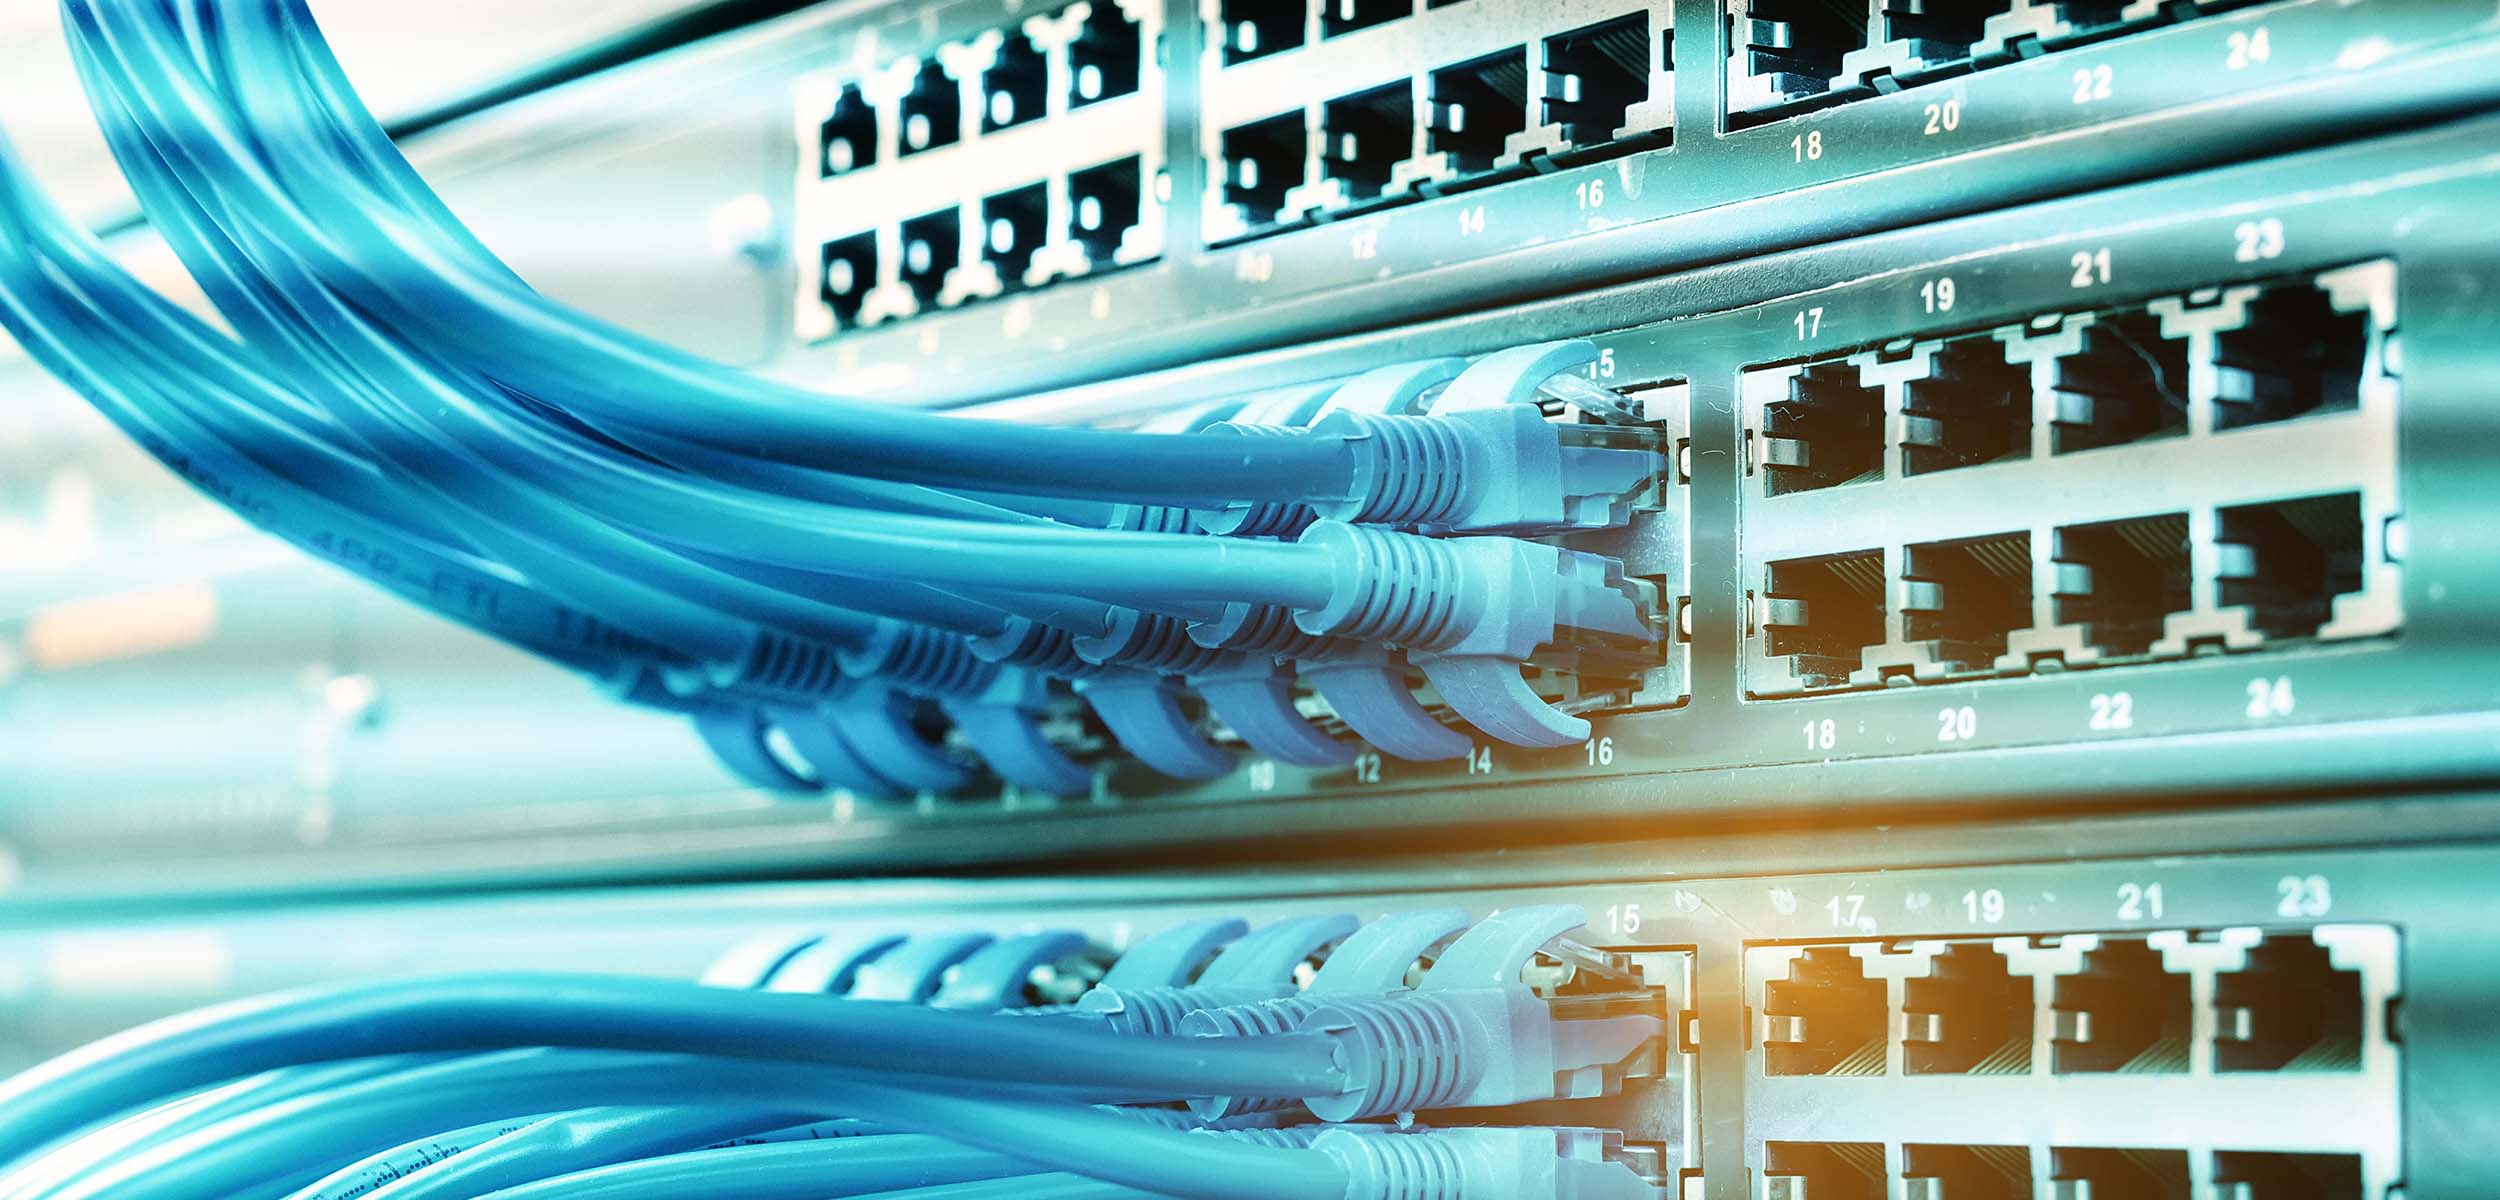 Top 2 Things to Consider When Running Ethernet and Power Cable